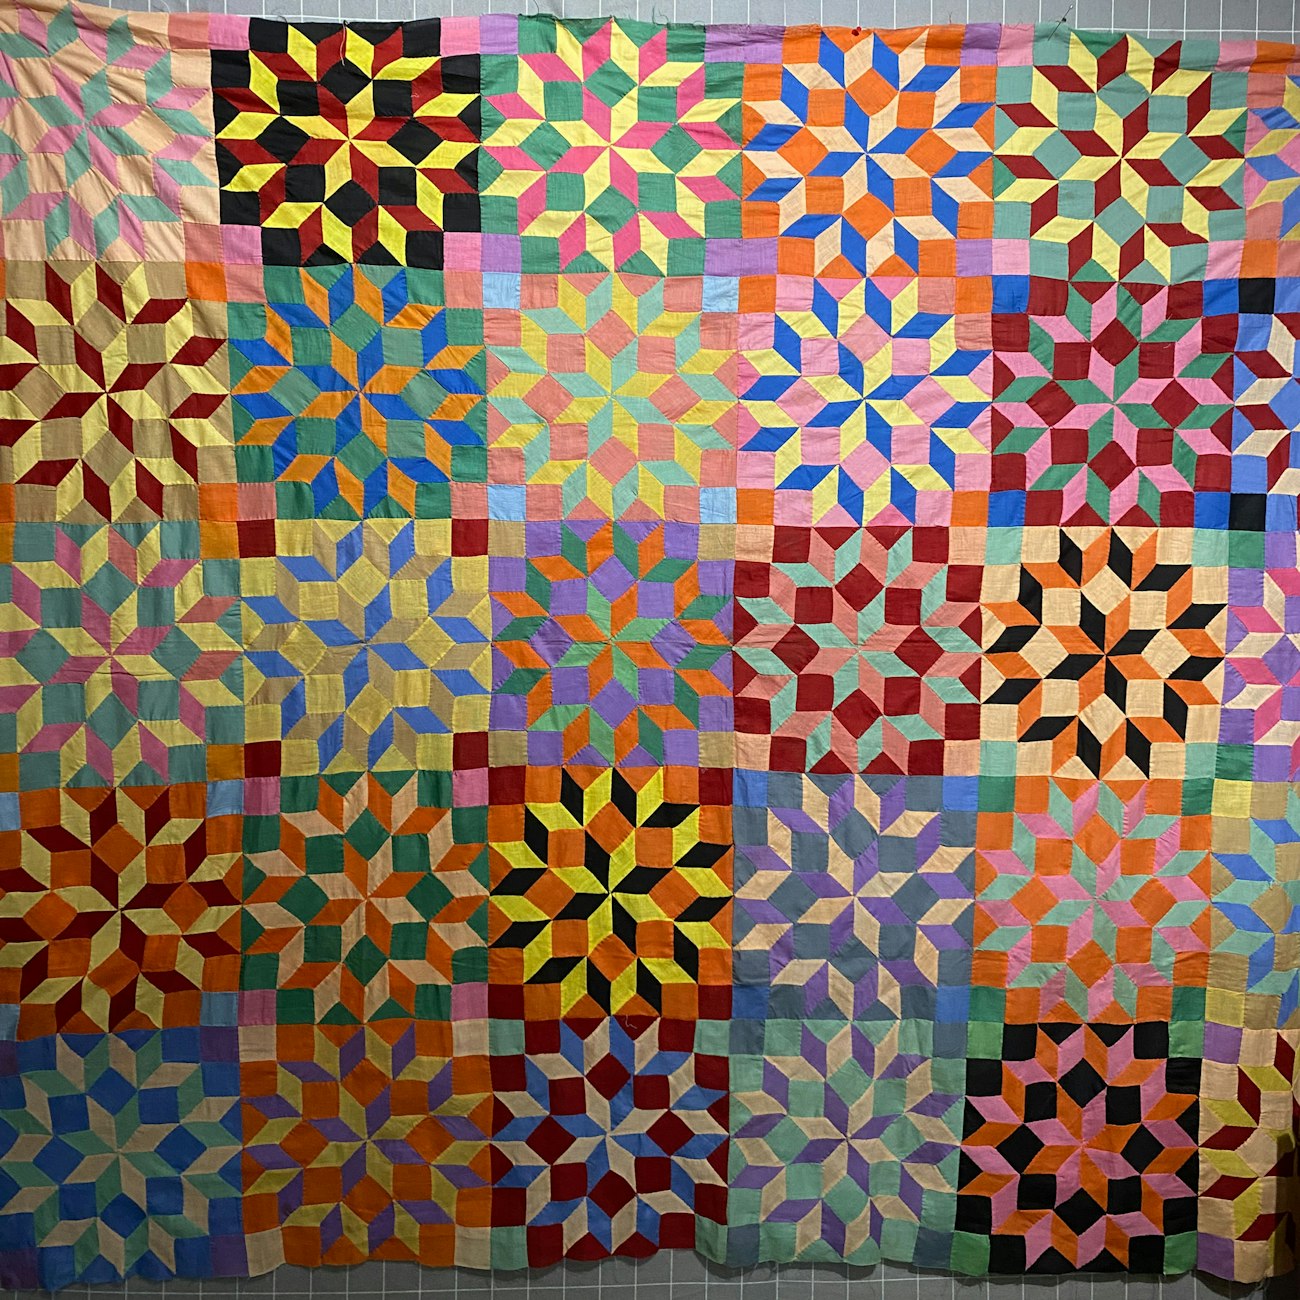 Brightly colored quilt of squares and diamonds